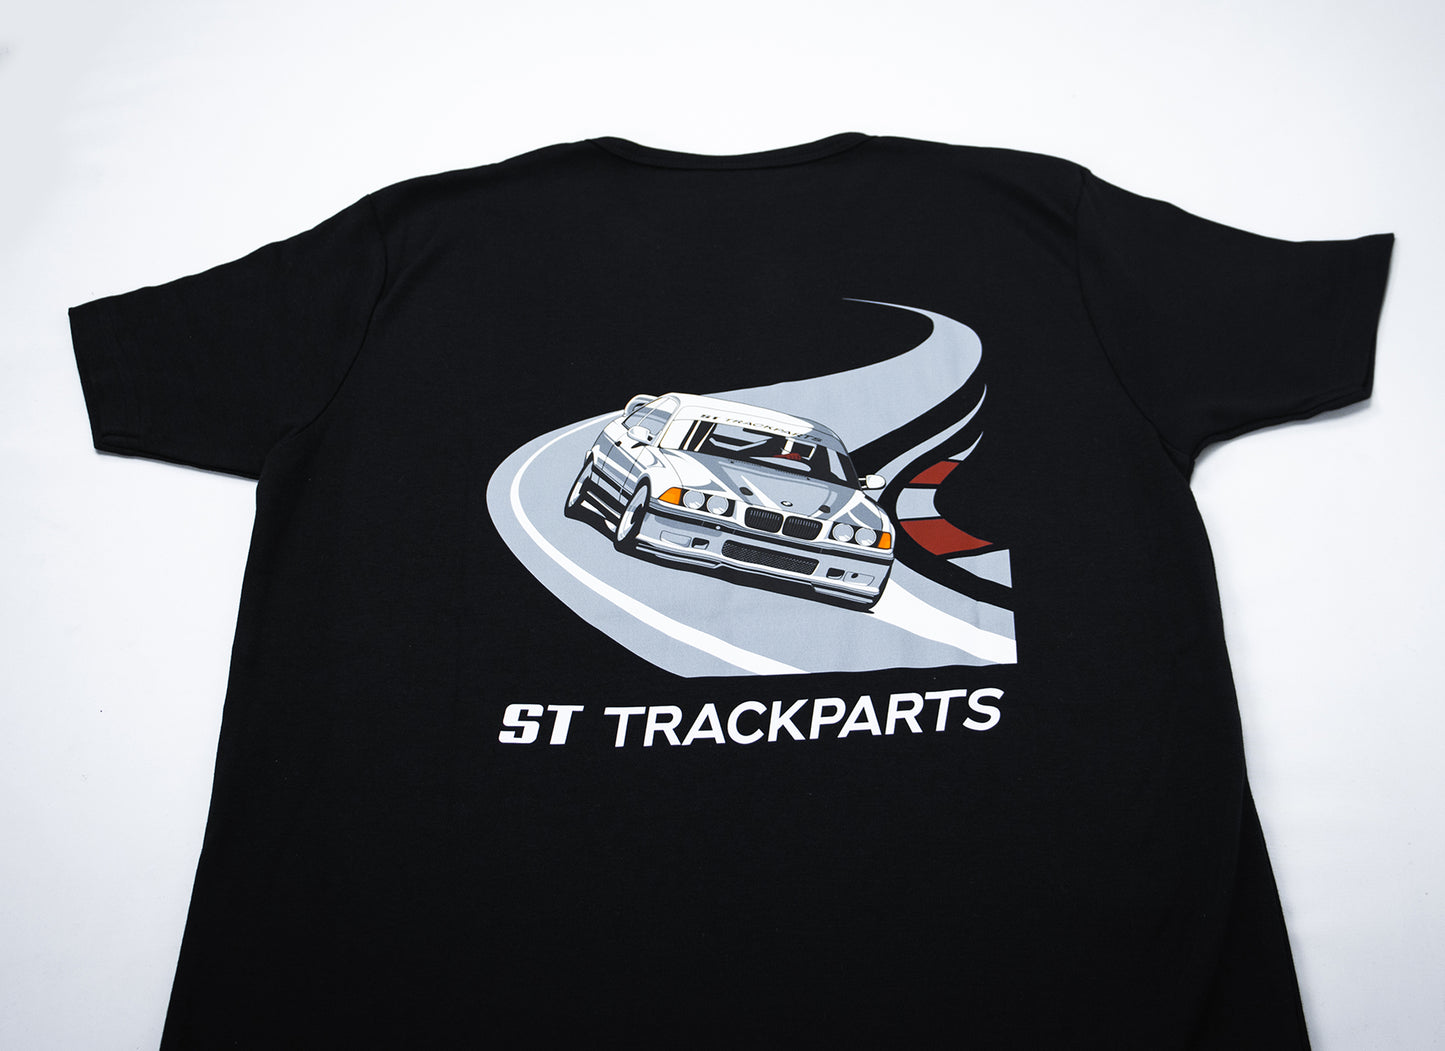 ST-Trackparts E36 T-shirt